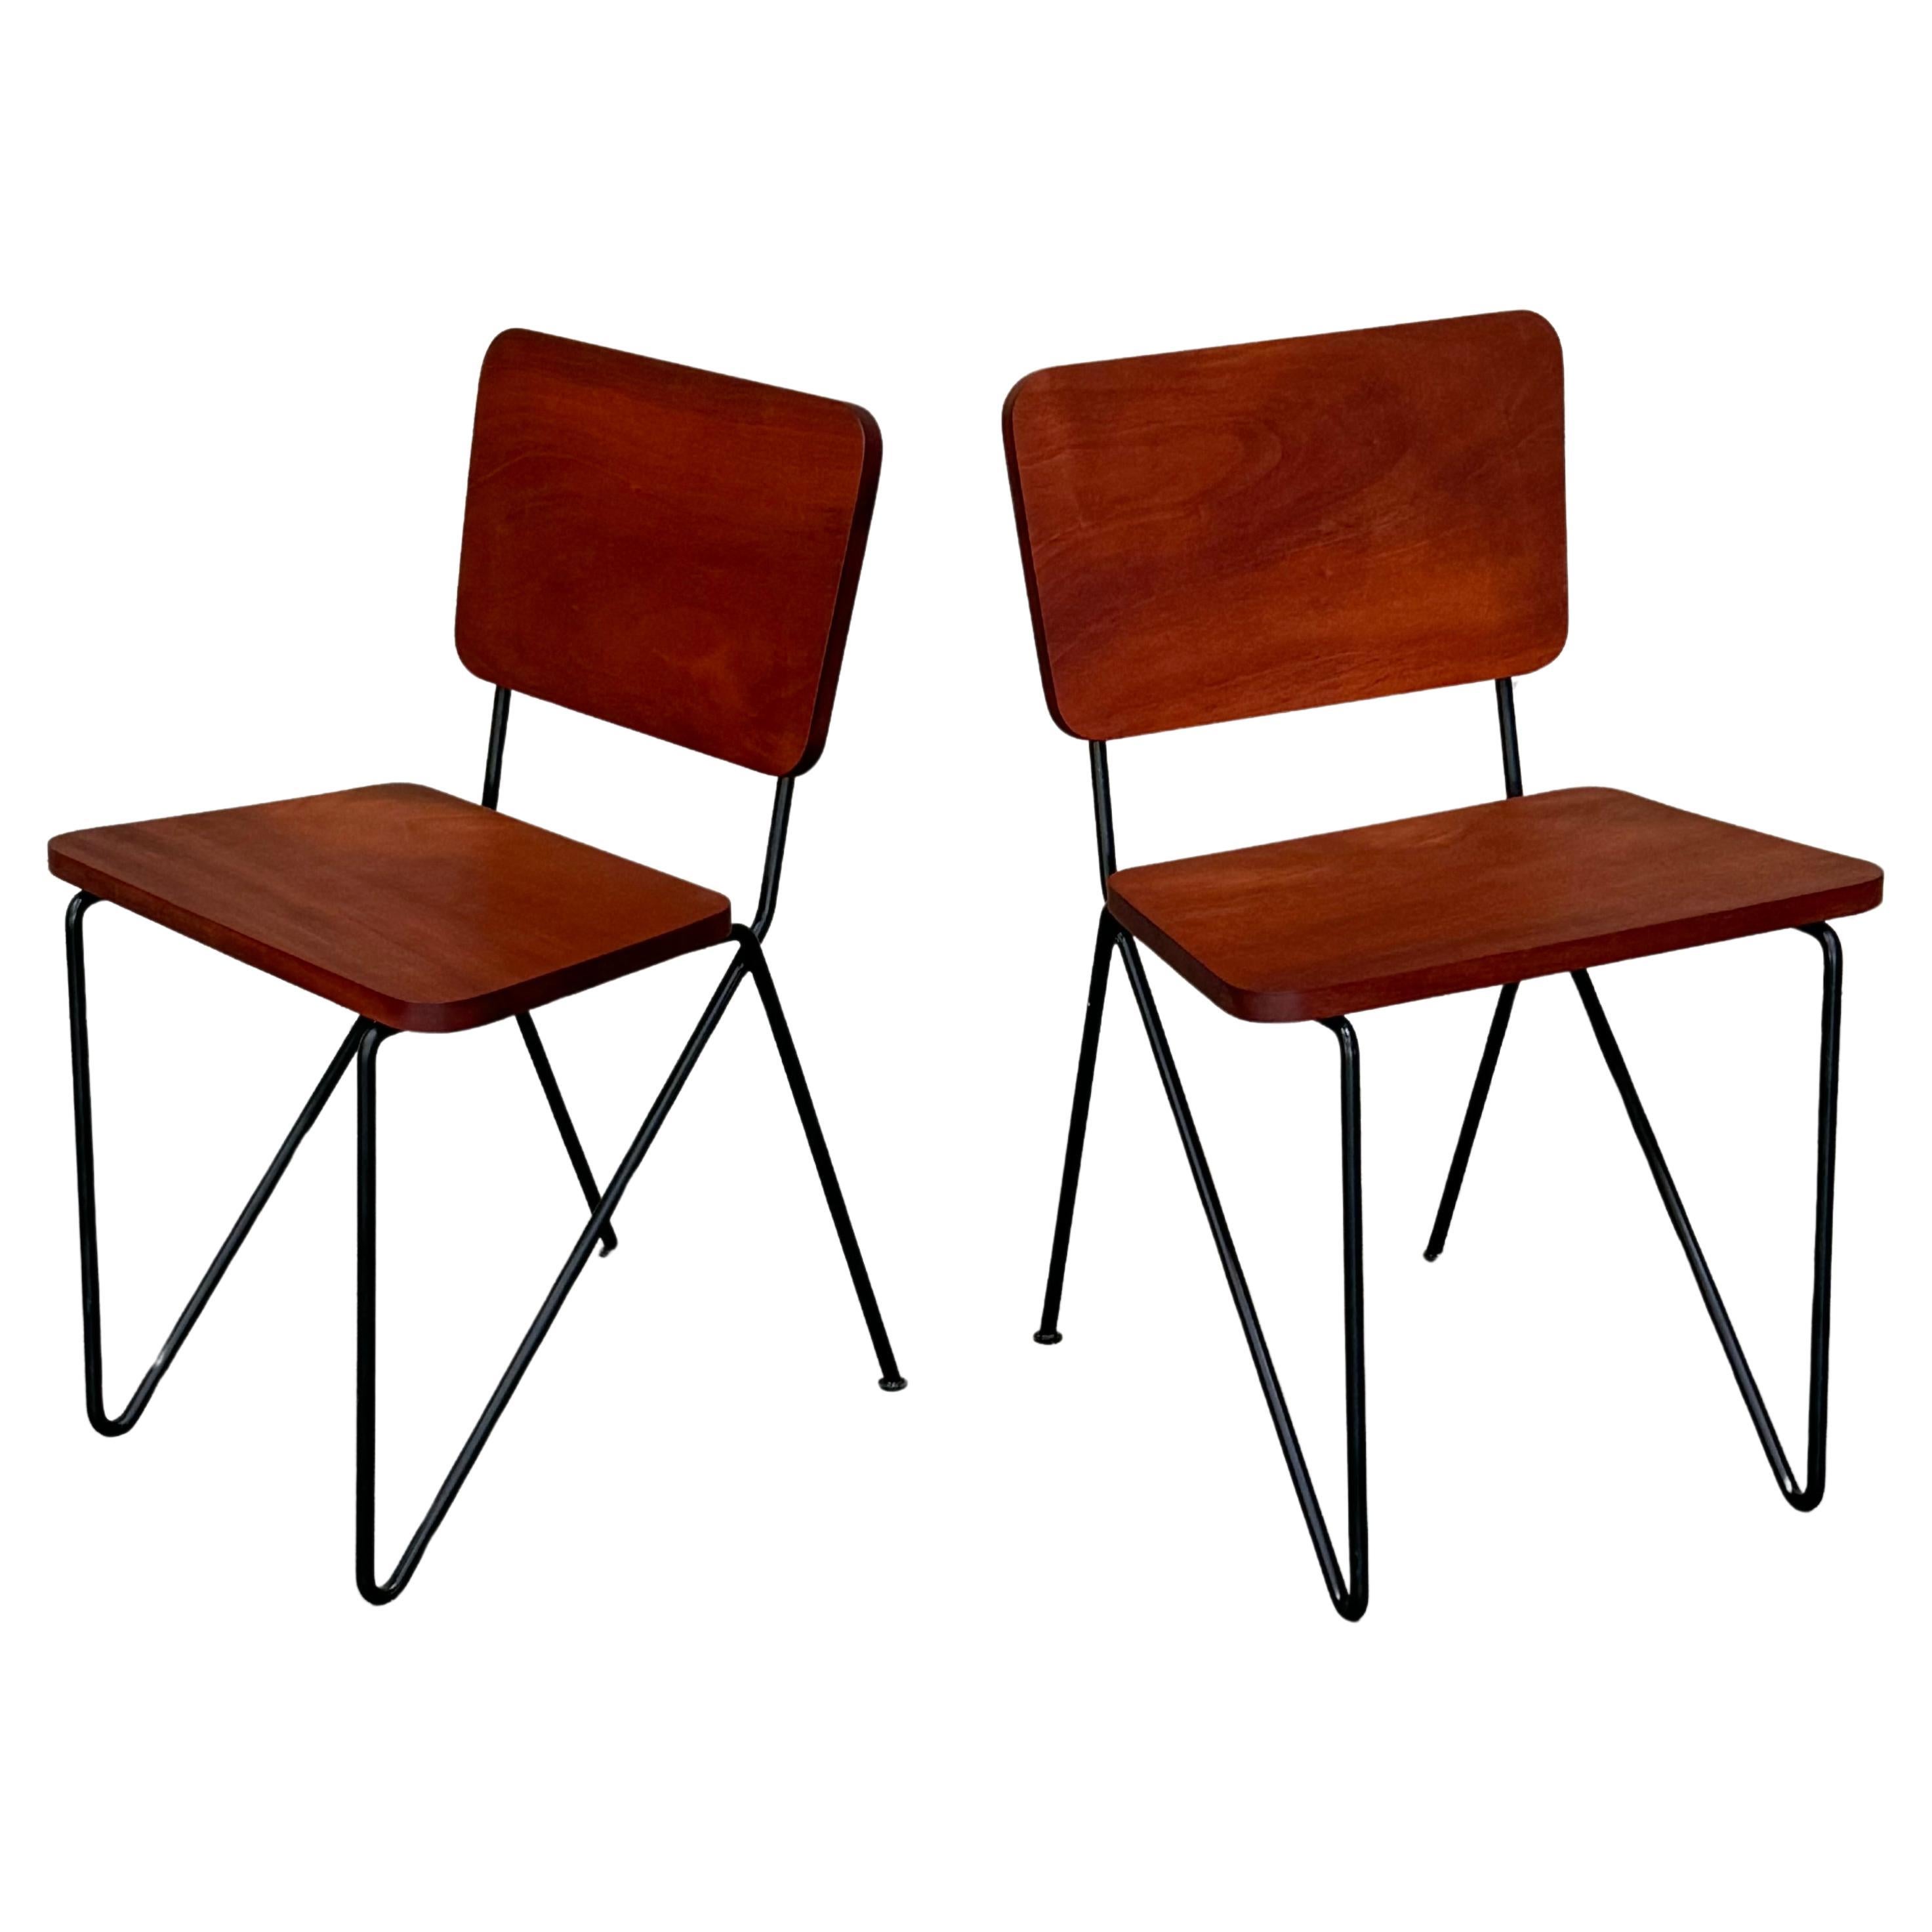 Pair of 1950s California Design Iron and Tropical Hardwood Side Chairs